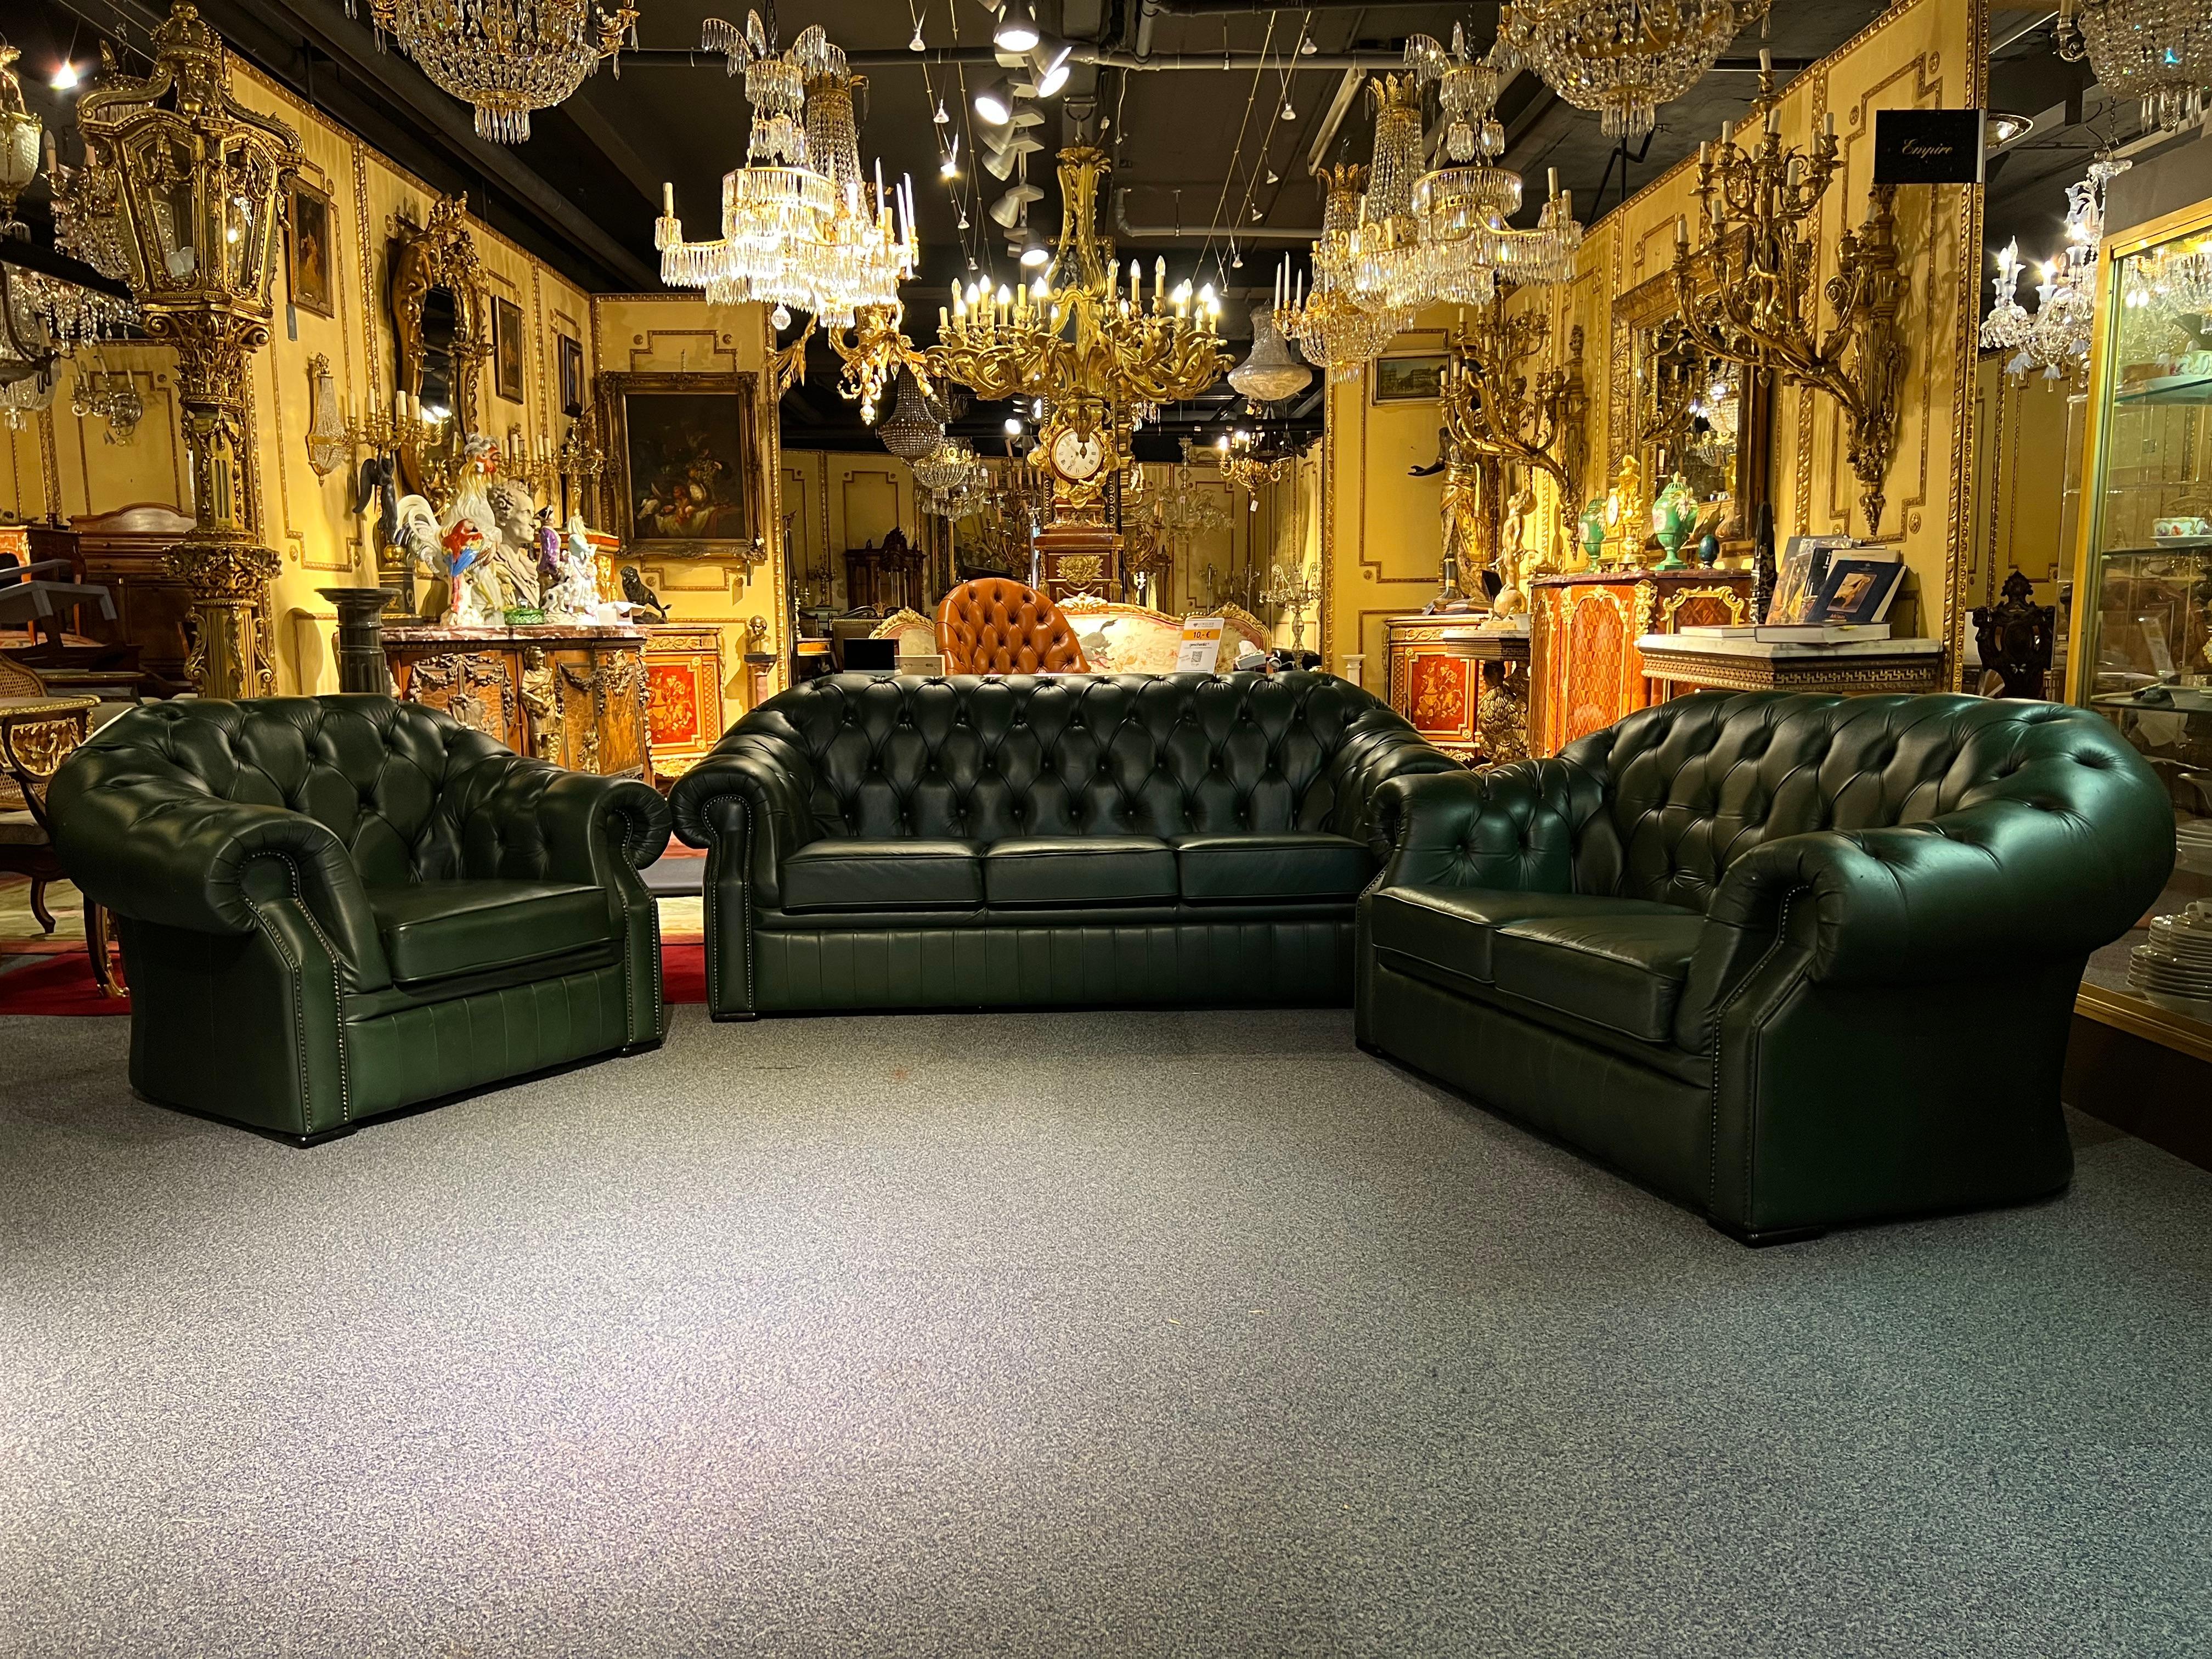 Original Green Chesterfield set Kent model. Over the years the Set has gotten a bit more character. We have treated the exterior with leather grease thoroughly inside. We also checked the wooden frame from the inside out. So, we can say that this